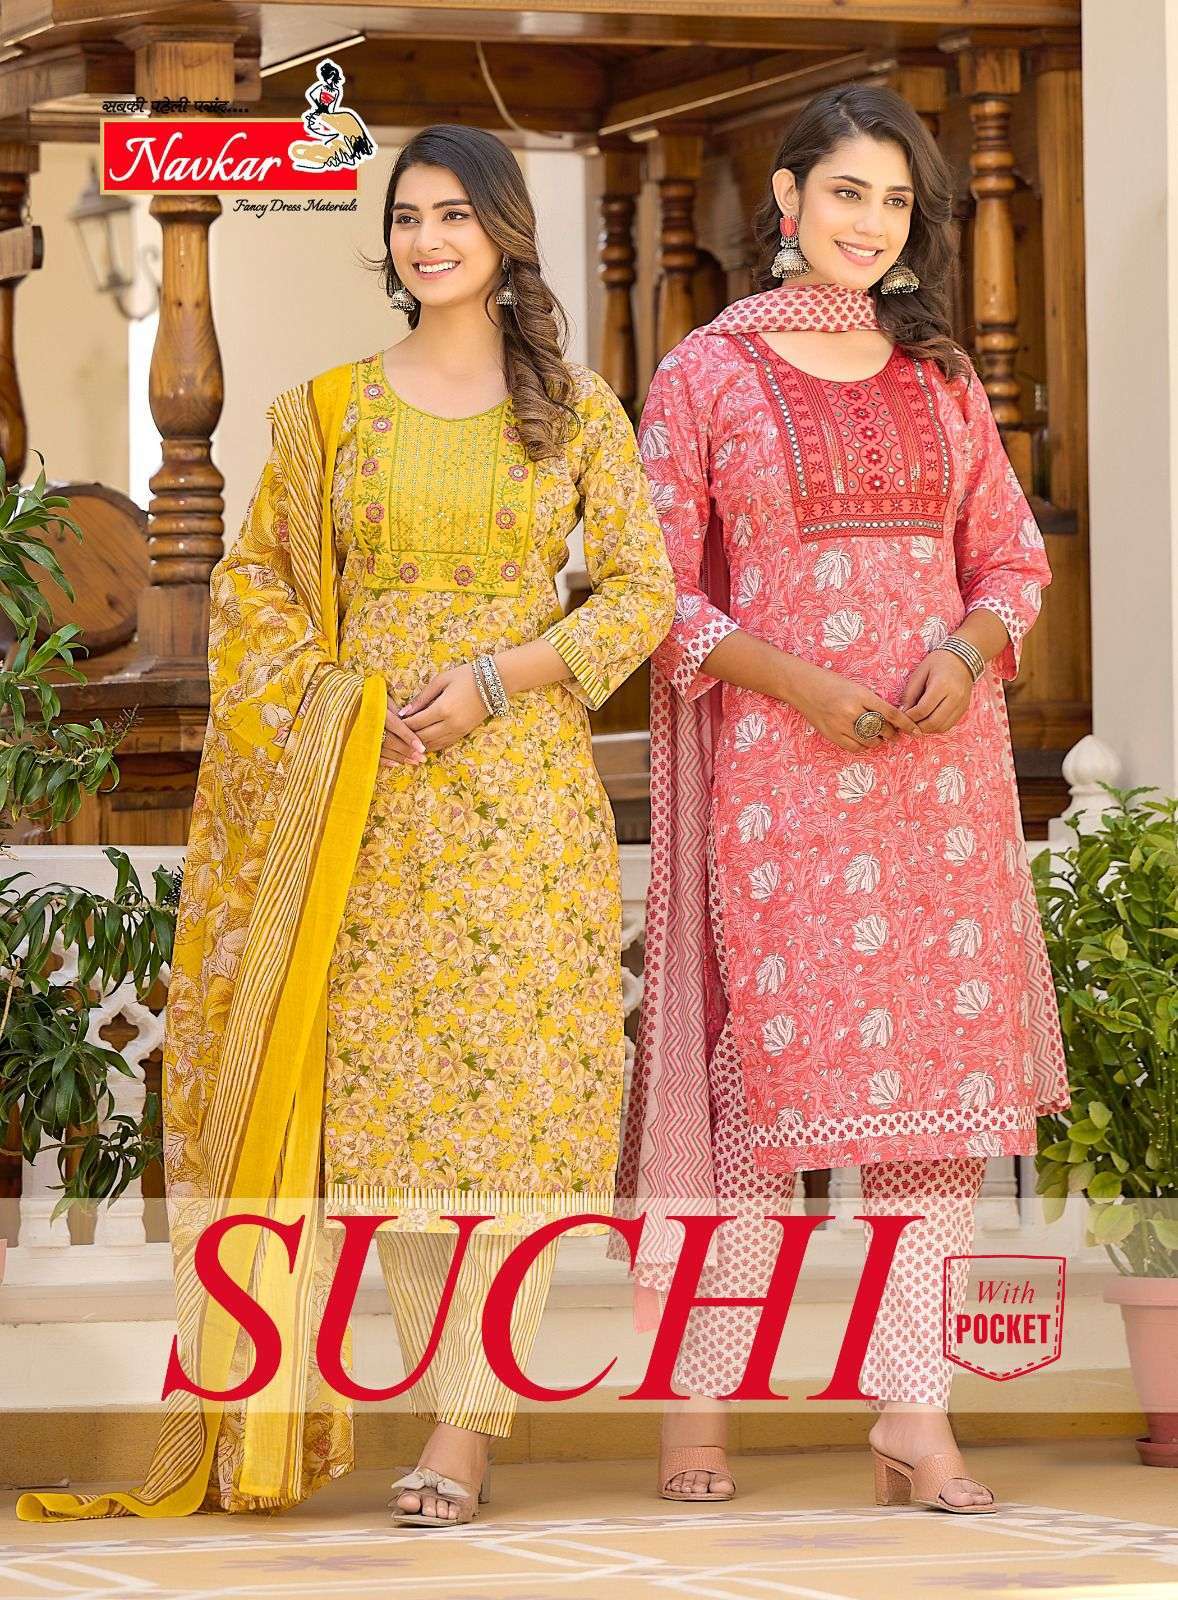 Navkar Suchi Vol 1 Cotton with printed readymade suits colle...